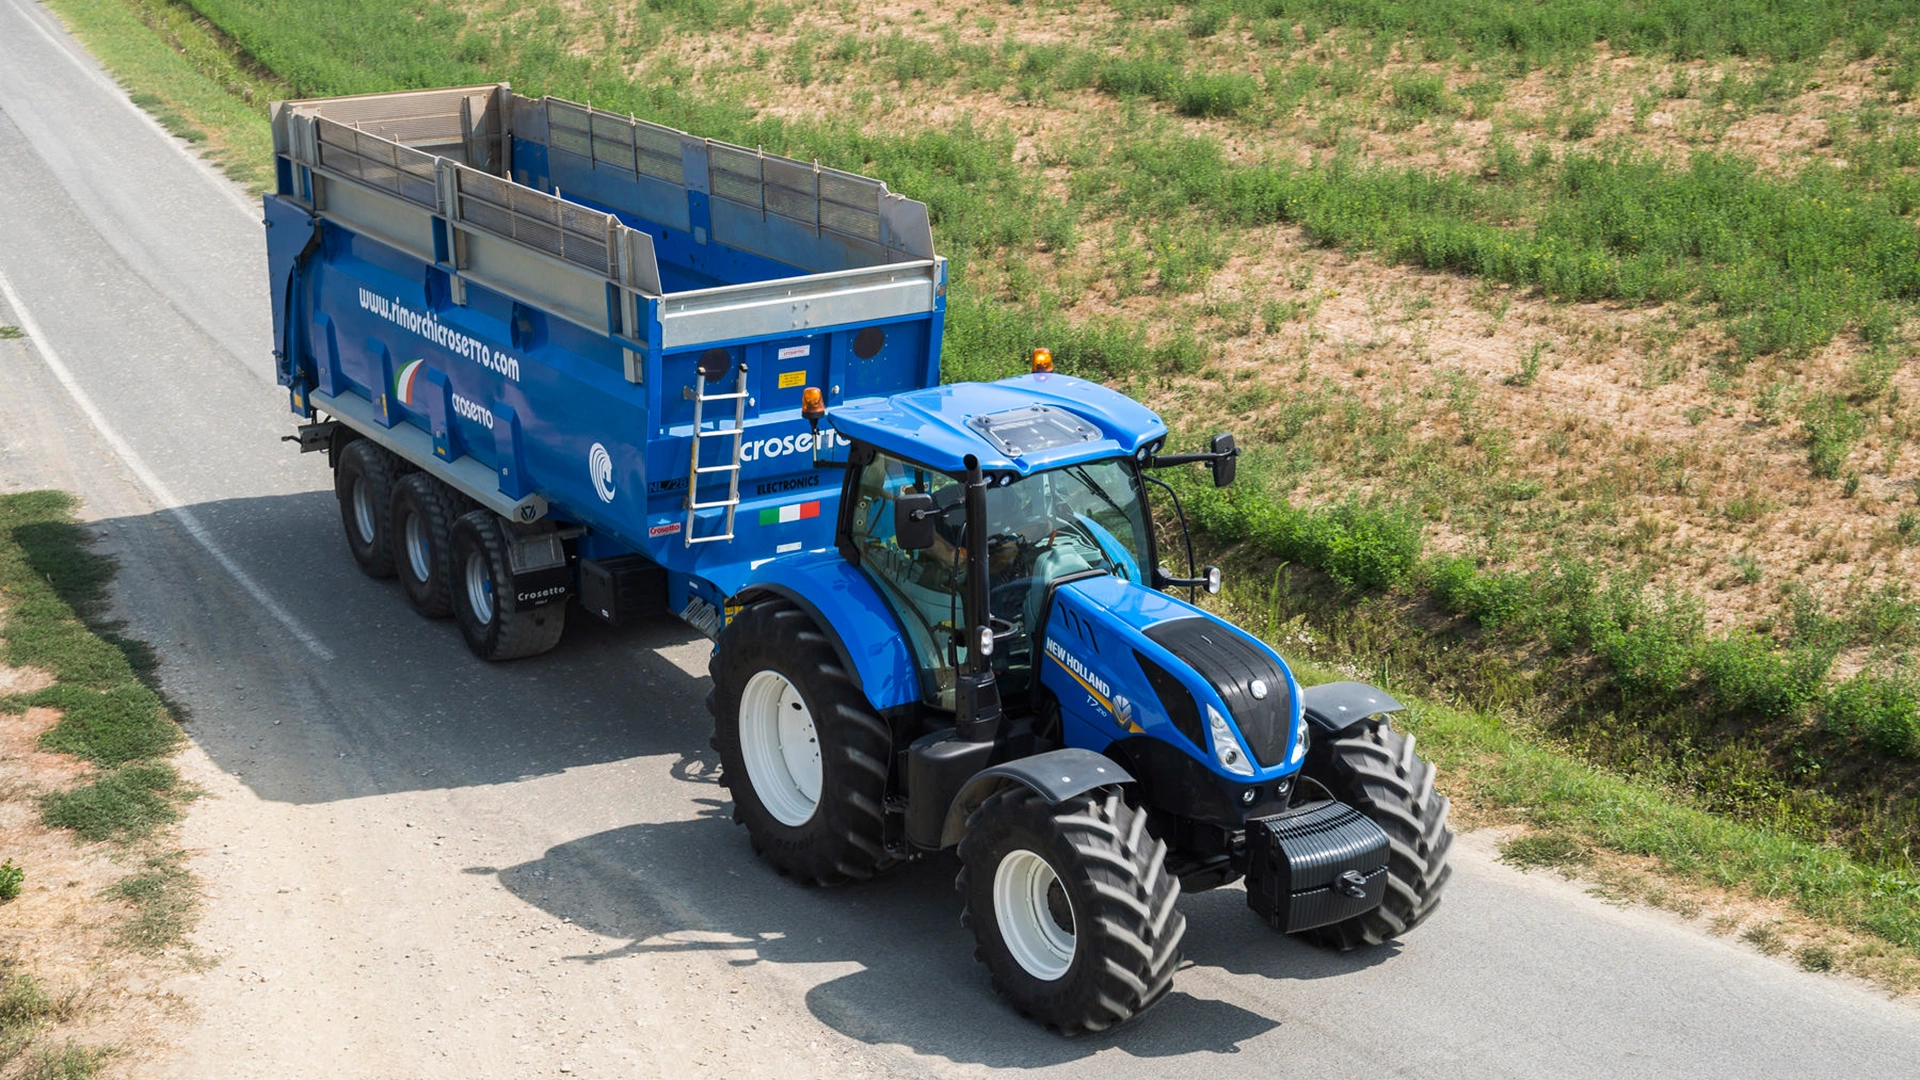 T7 LWB Tractor  New Holland UK